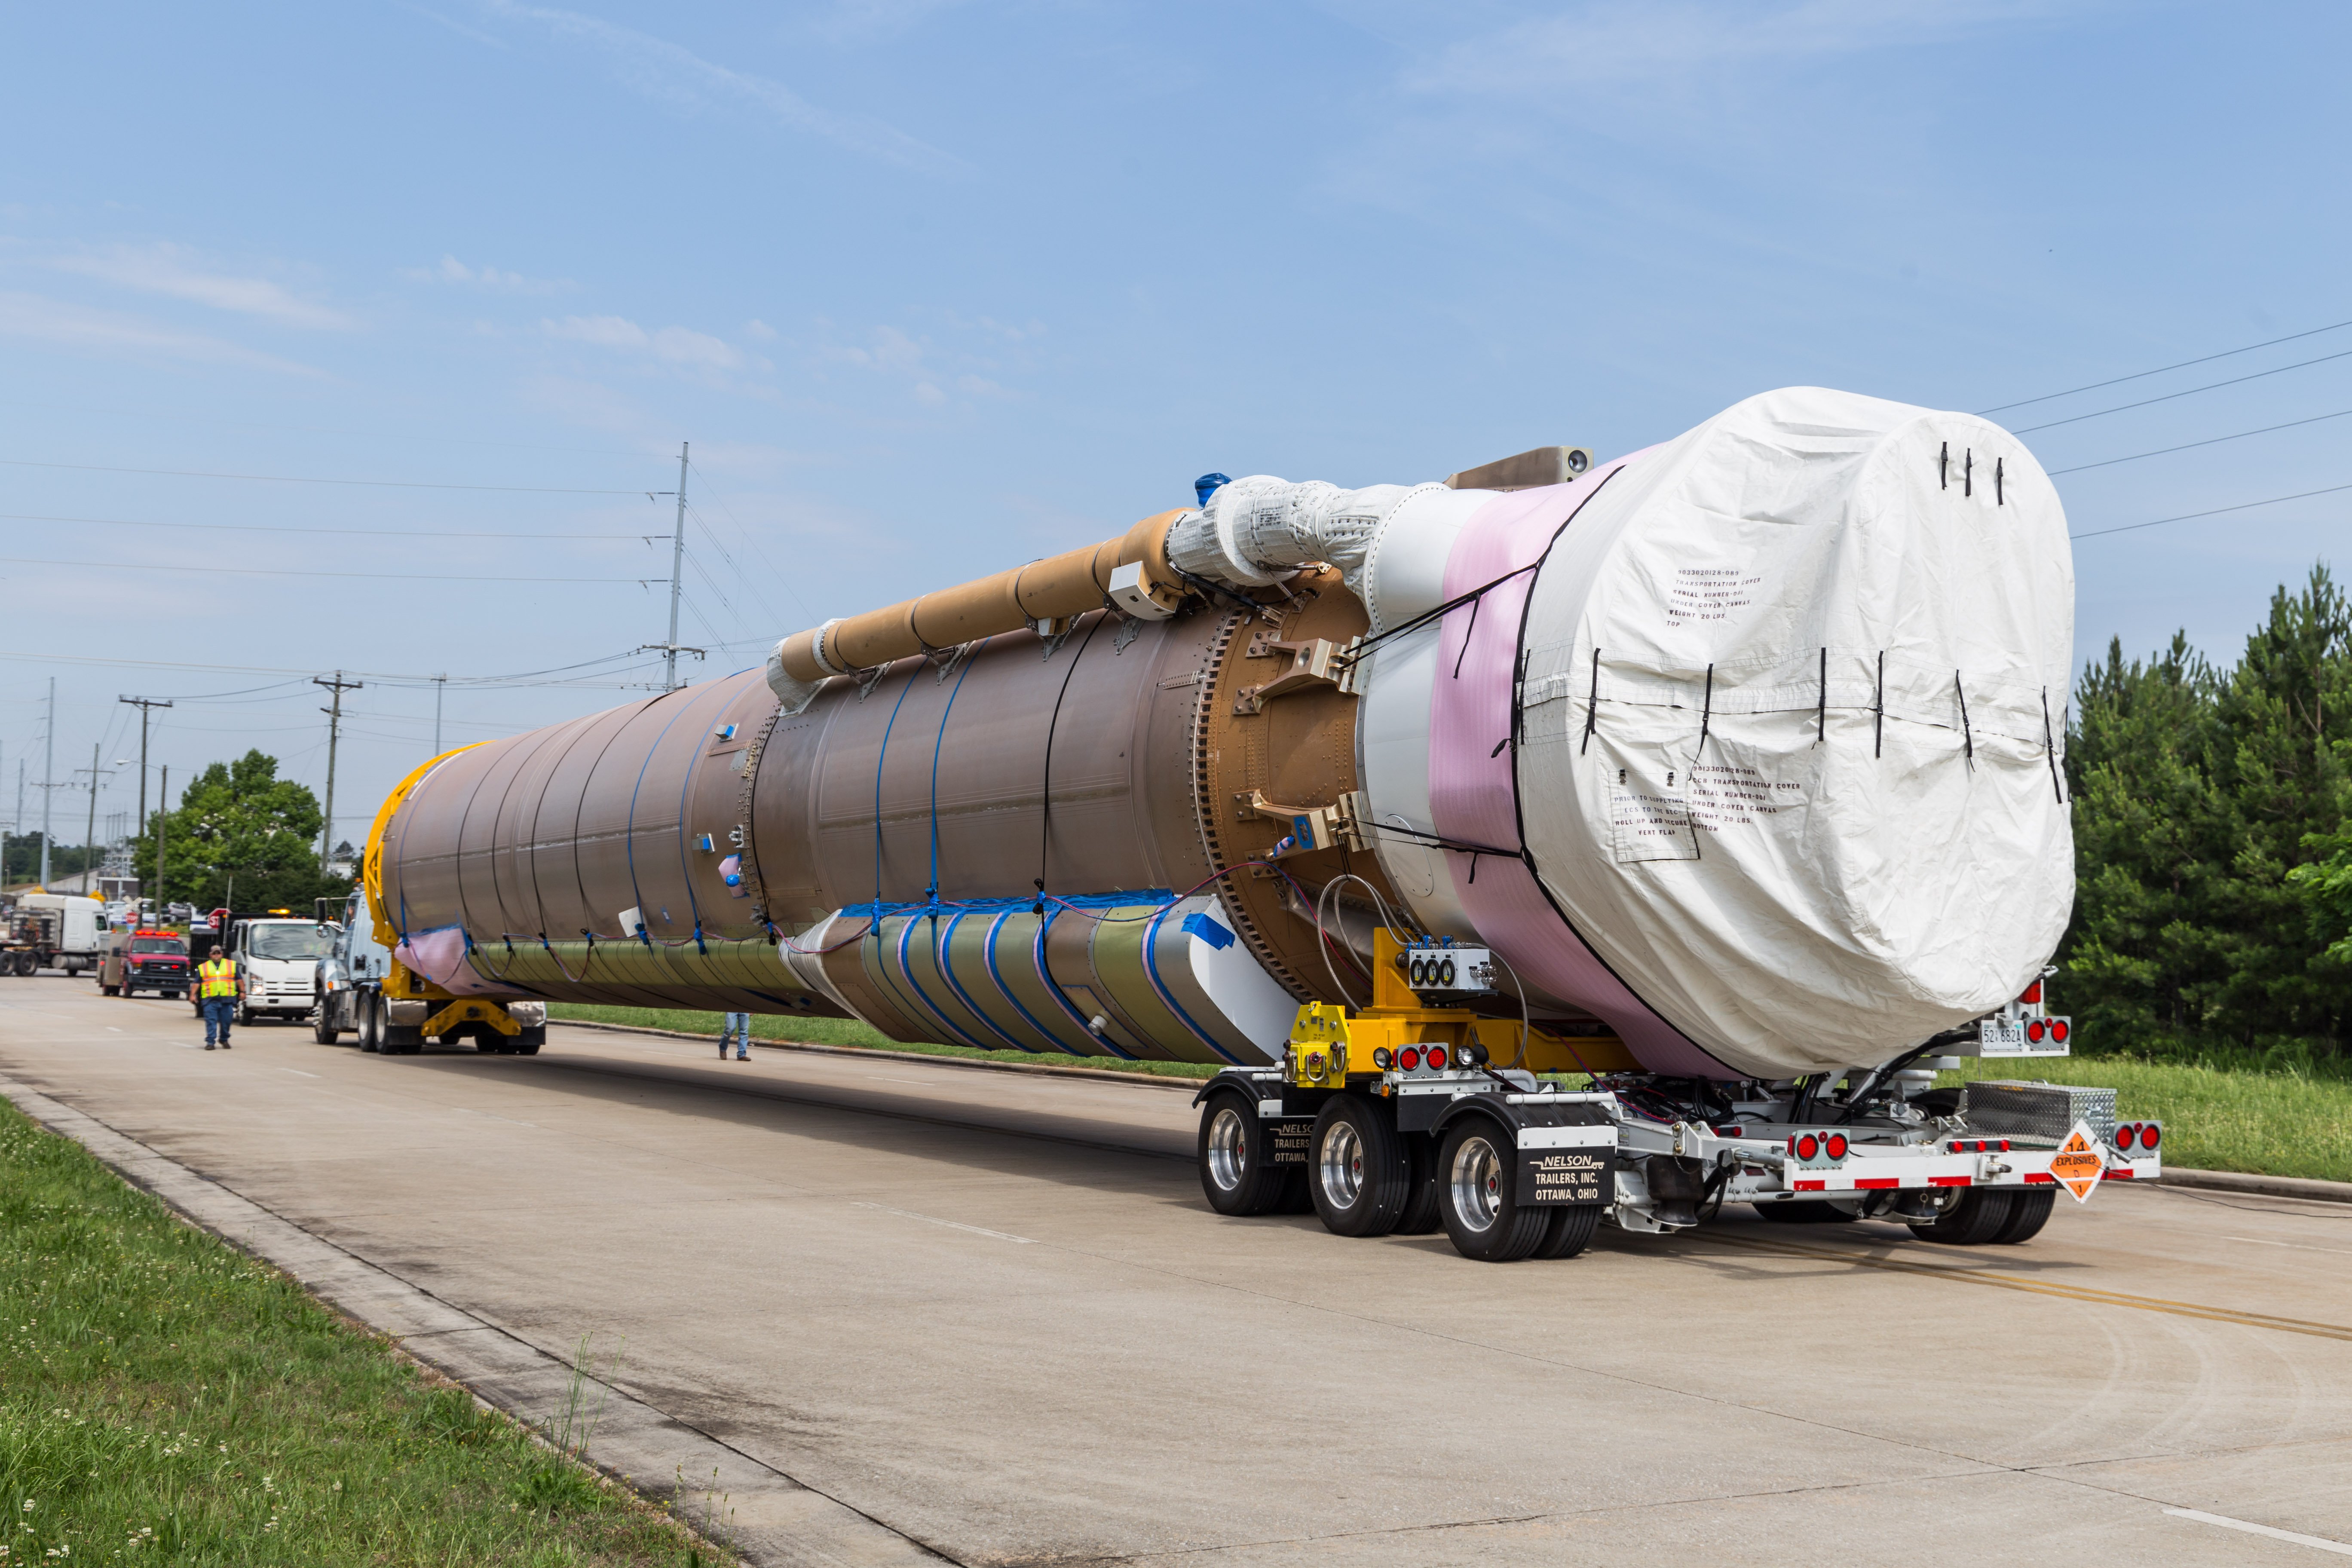 The Atlas first stage for CFT travels down the road the Decatur dock. Photo by ULA